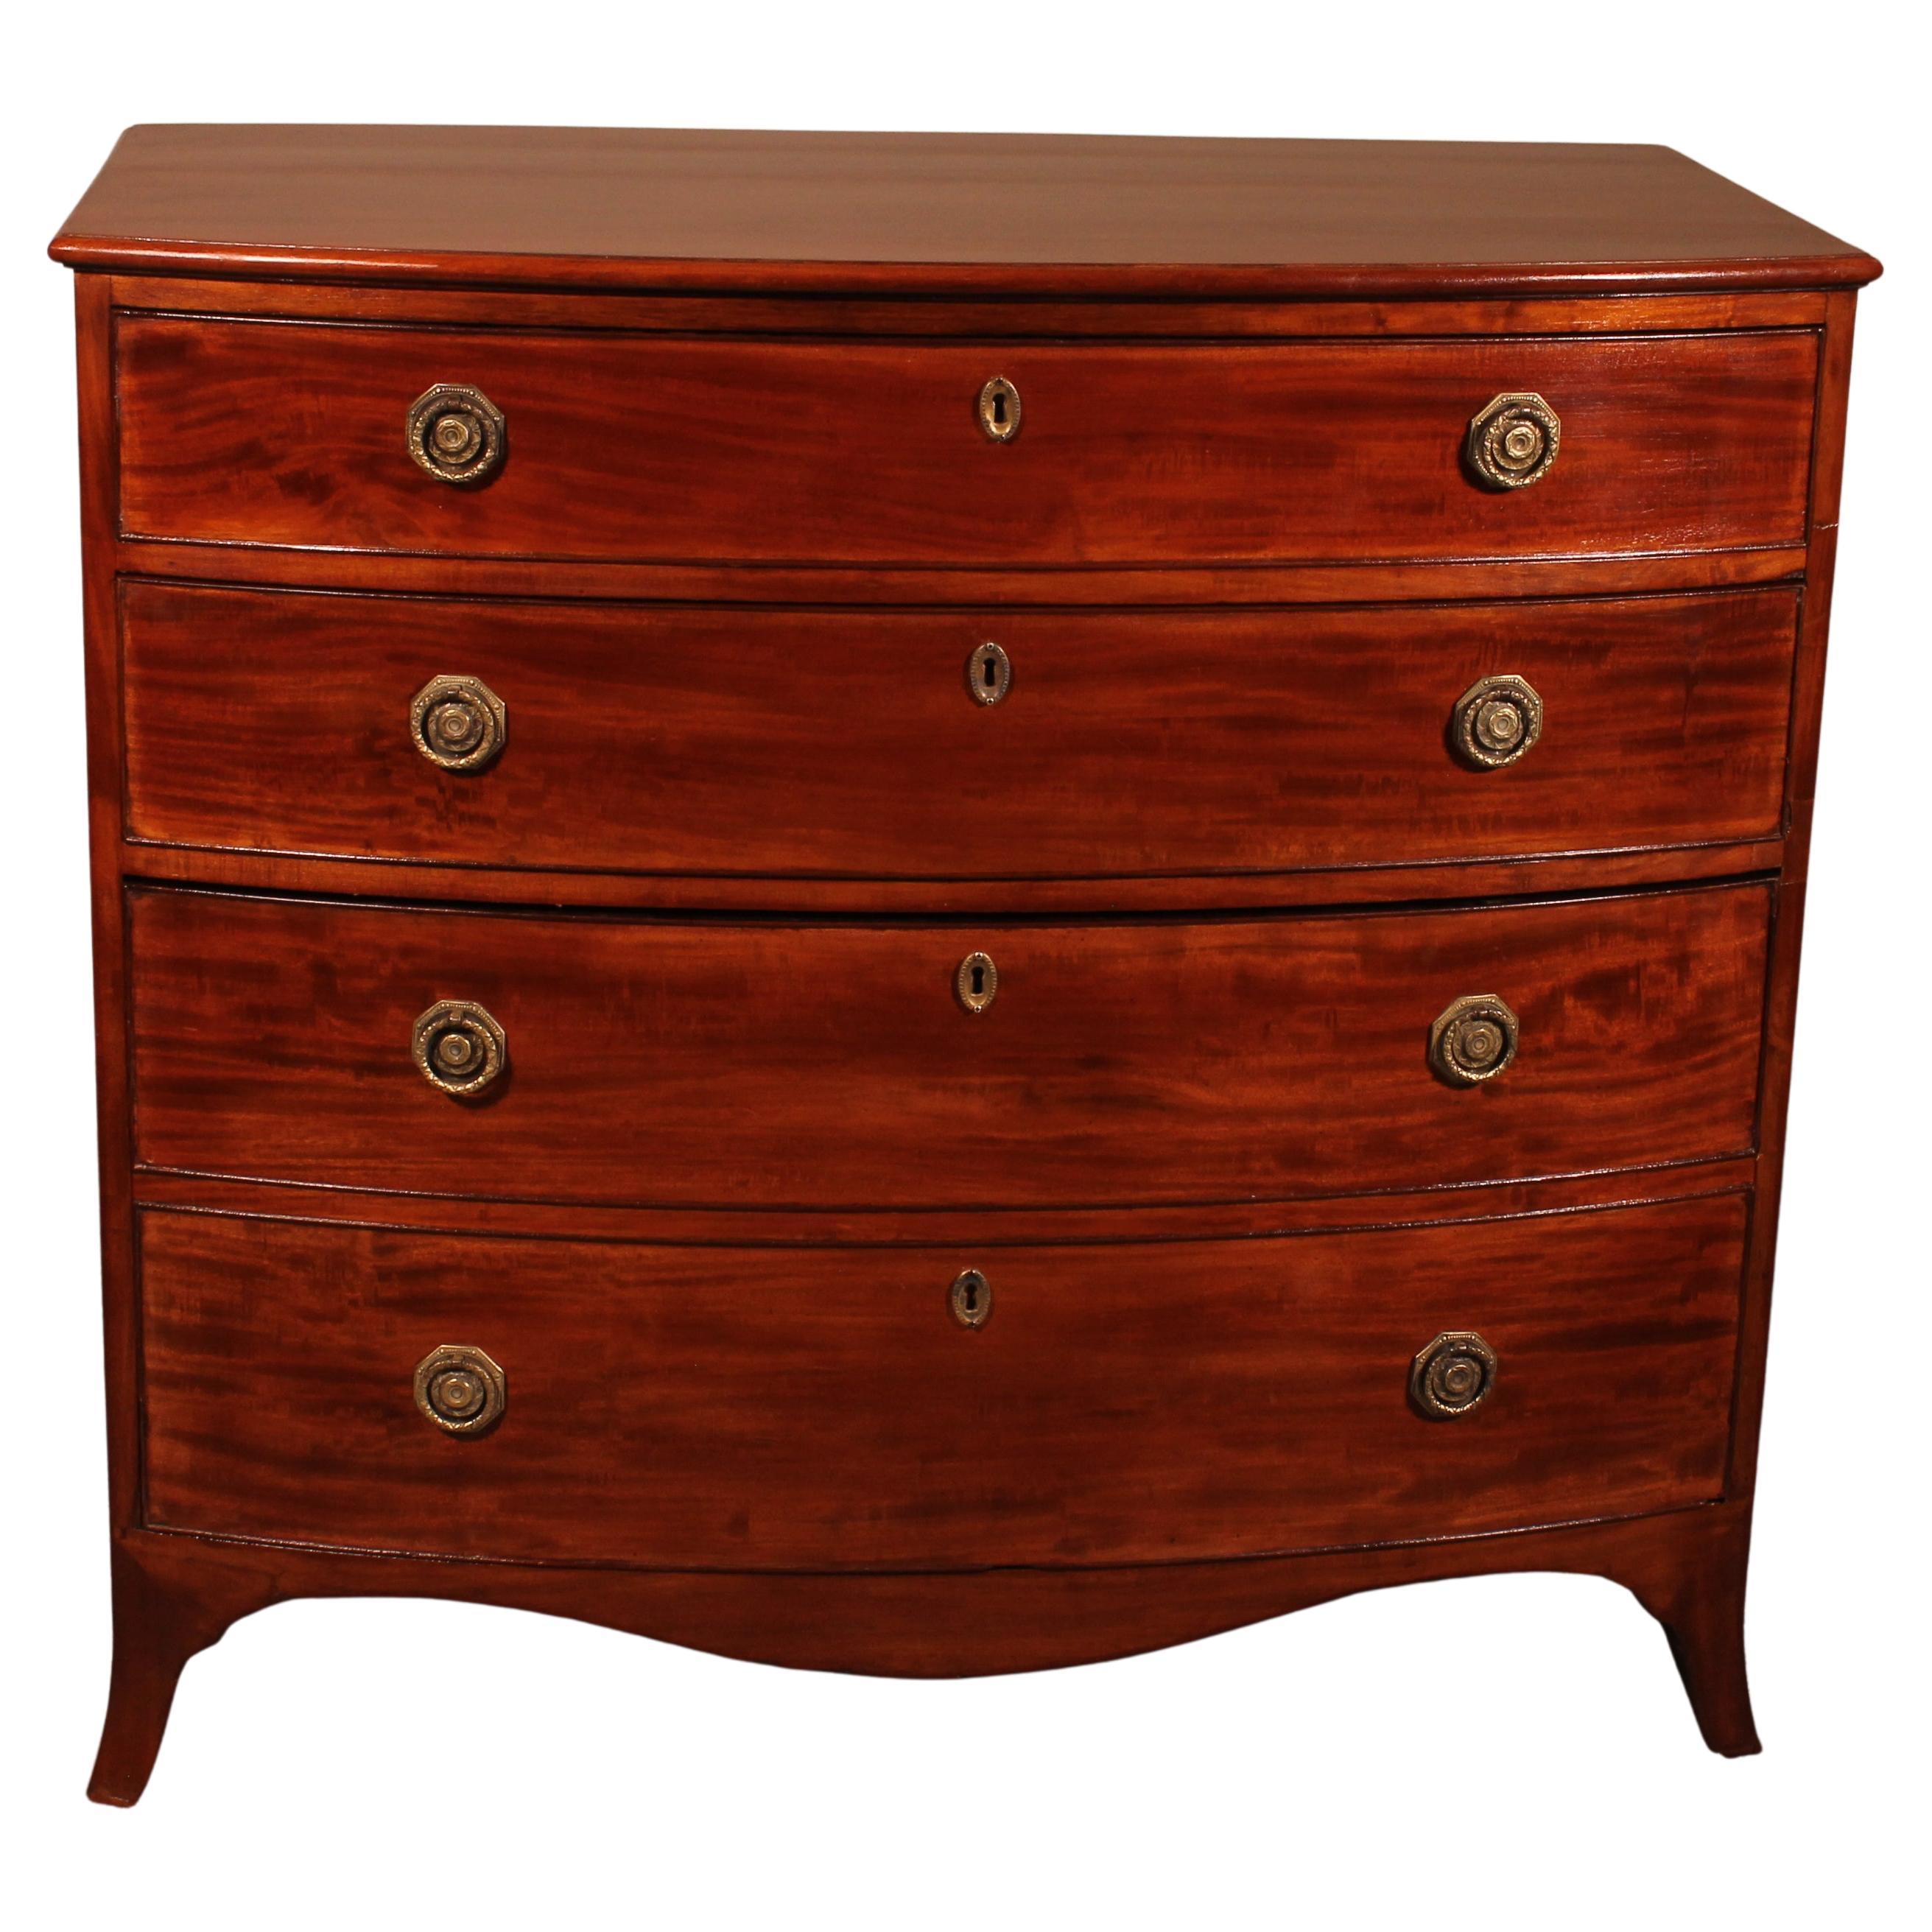 Bowfront Chest of Drawers Circa 1800 in Mahogany